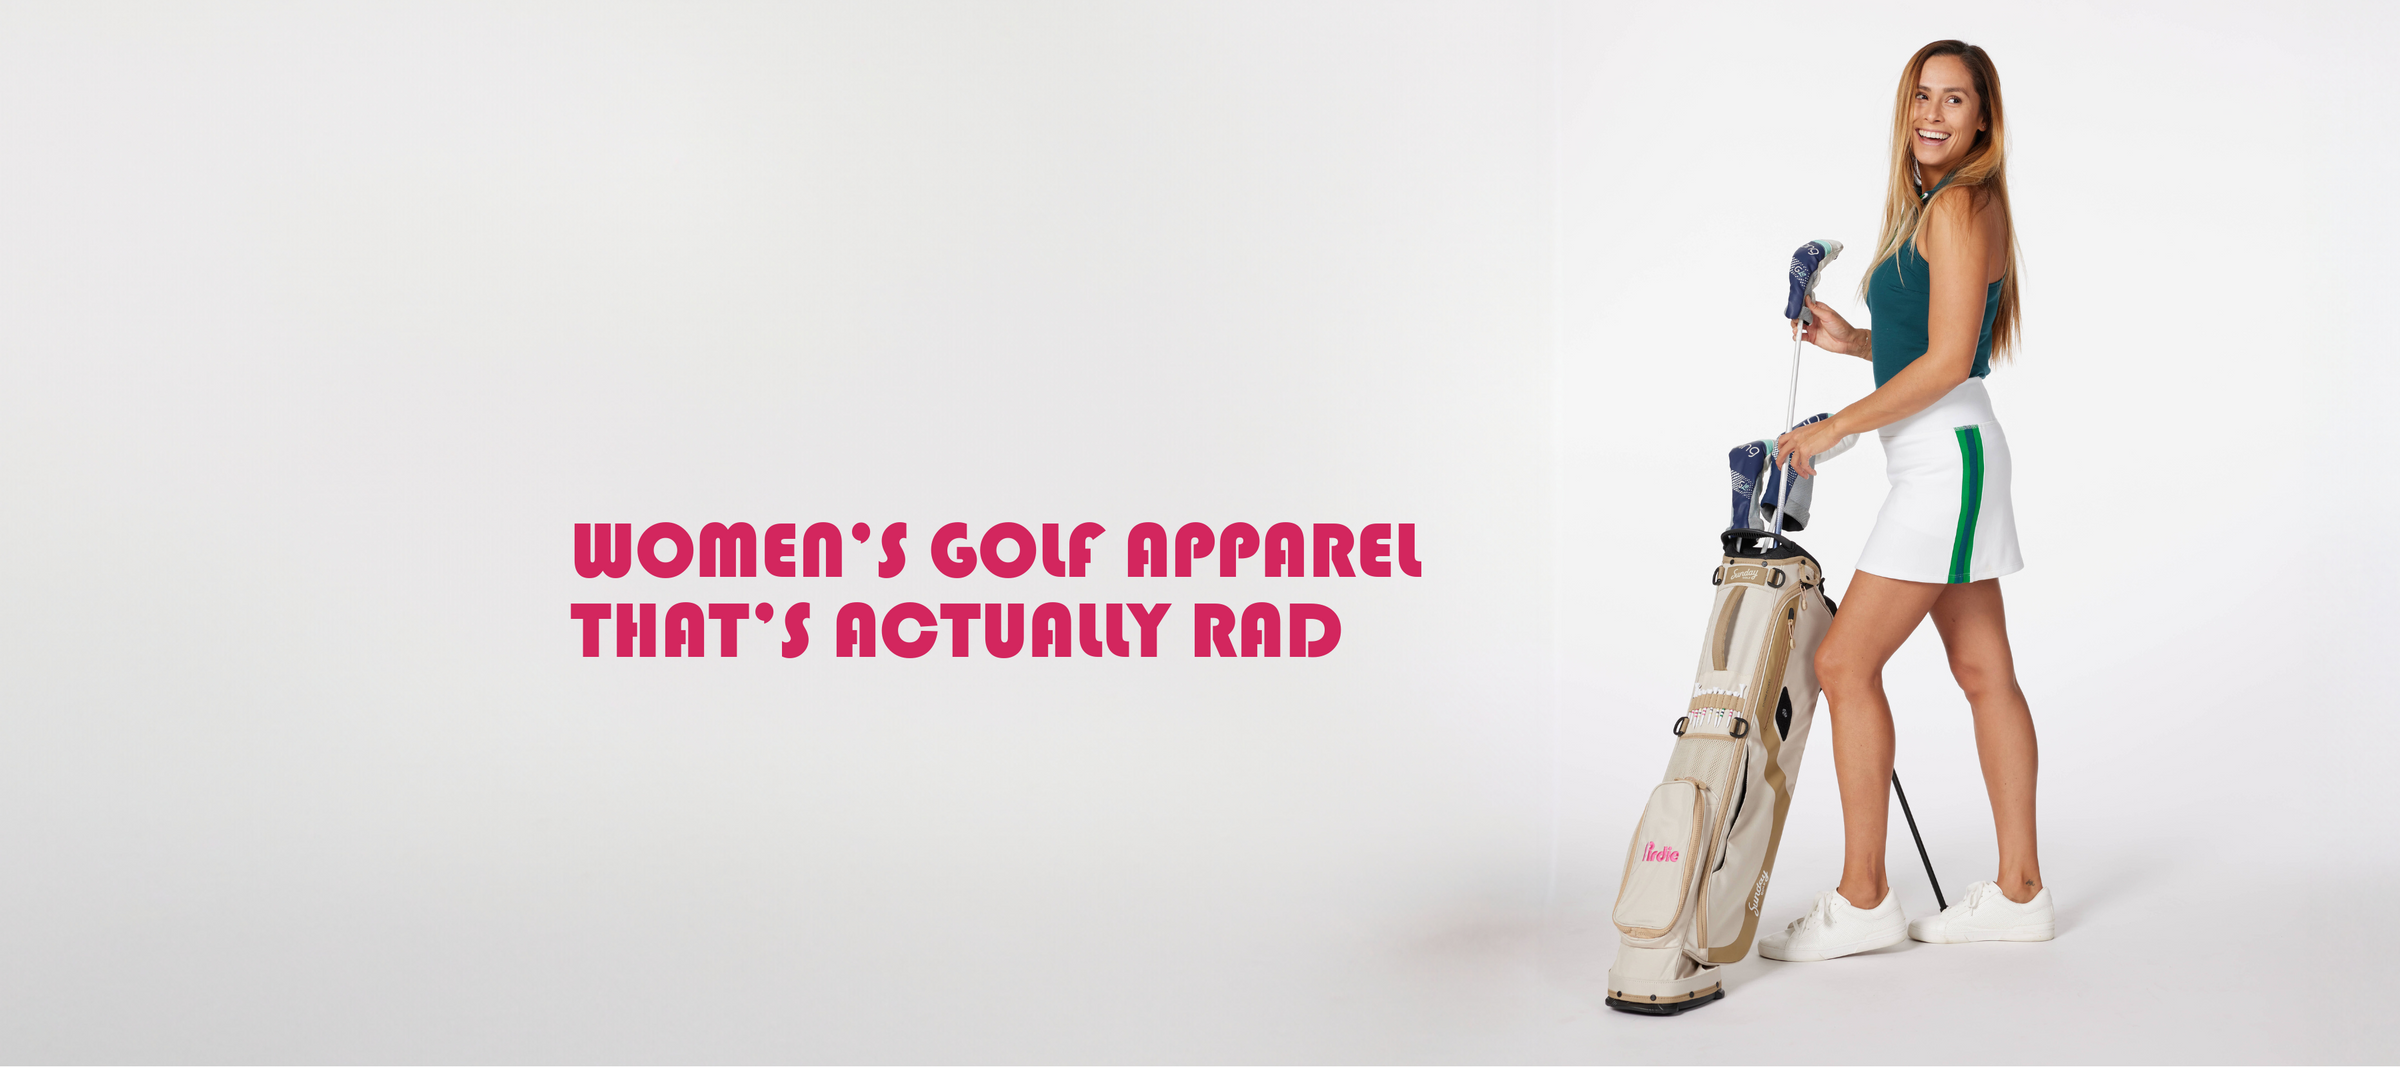 Pirdie - Womens Golf Apparel That's Actually Rad